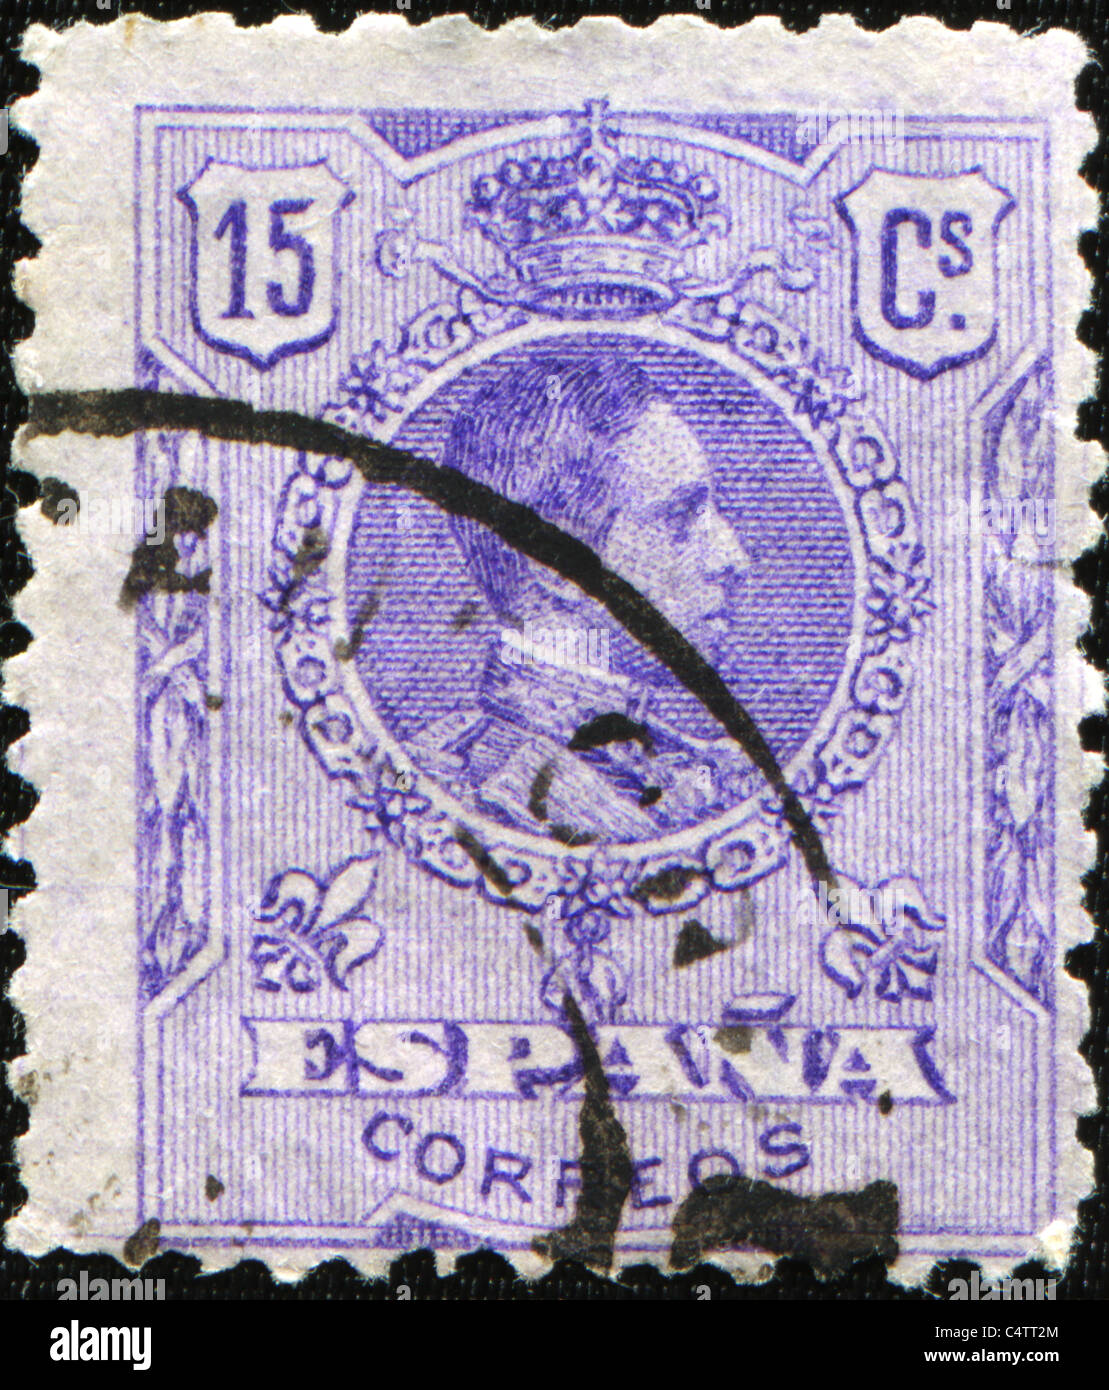 SPAIN - CIRCA 1909: A stamp printed in Spain shows King Alfonso XIII of Spain, circa 1909 Stock Photo